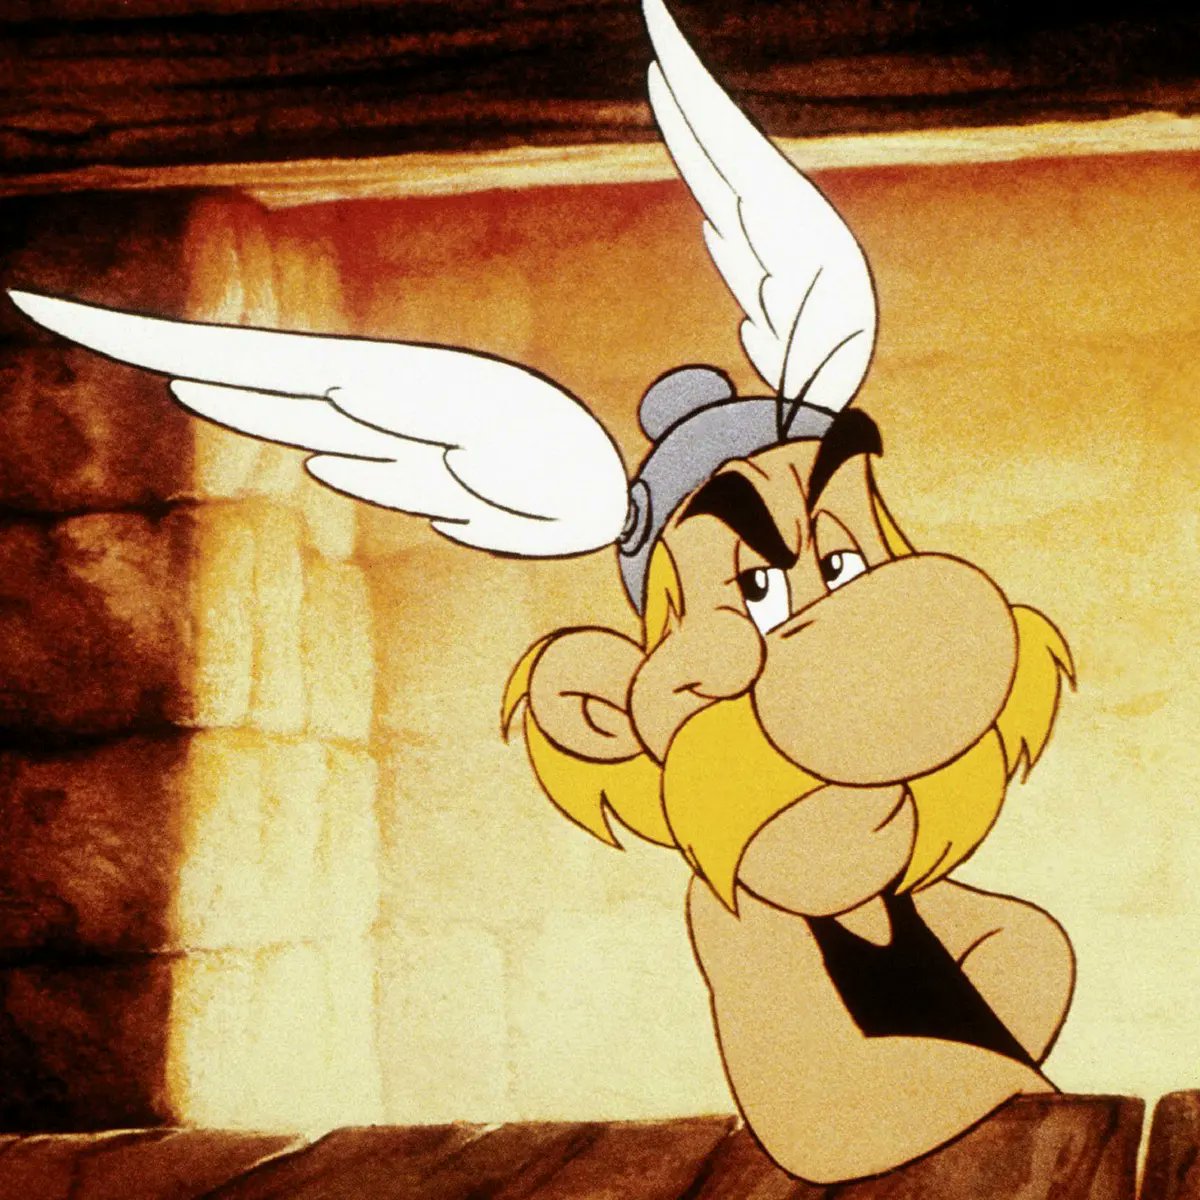 My goal in life is to look as much as Asterix as possible.